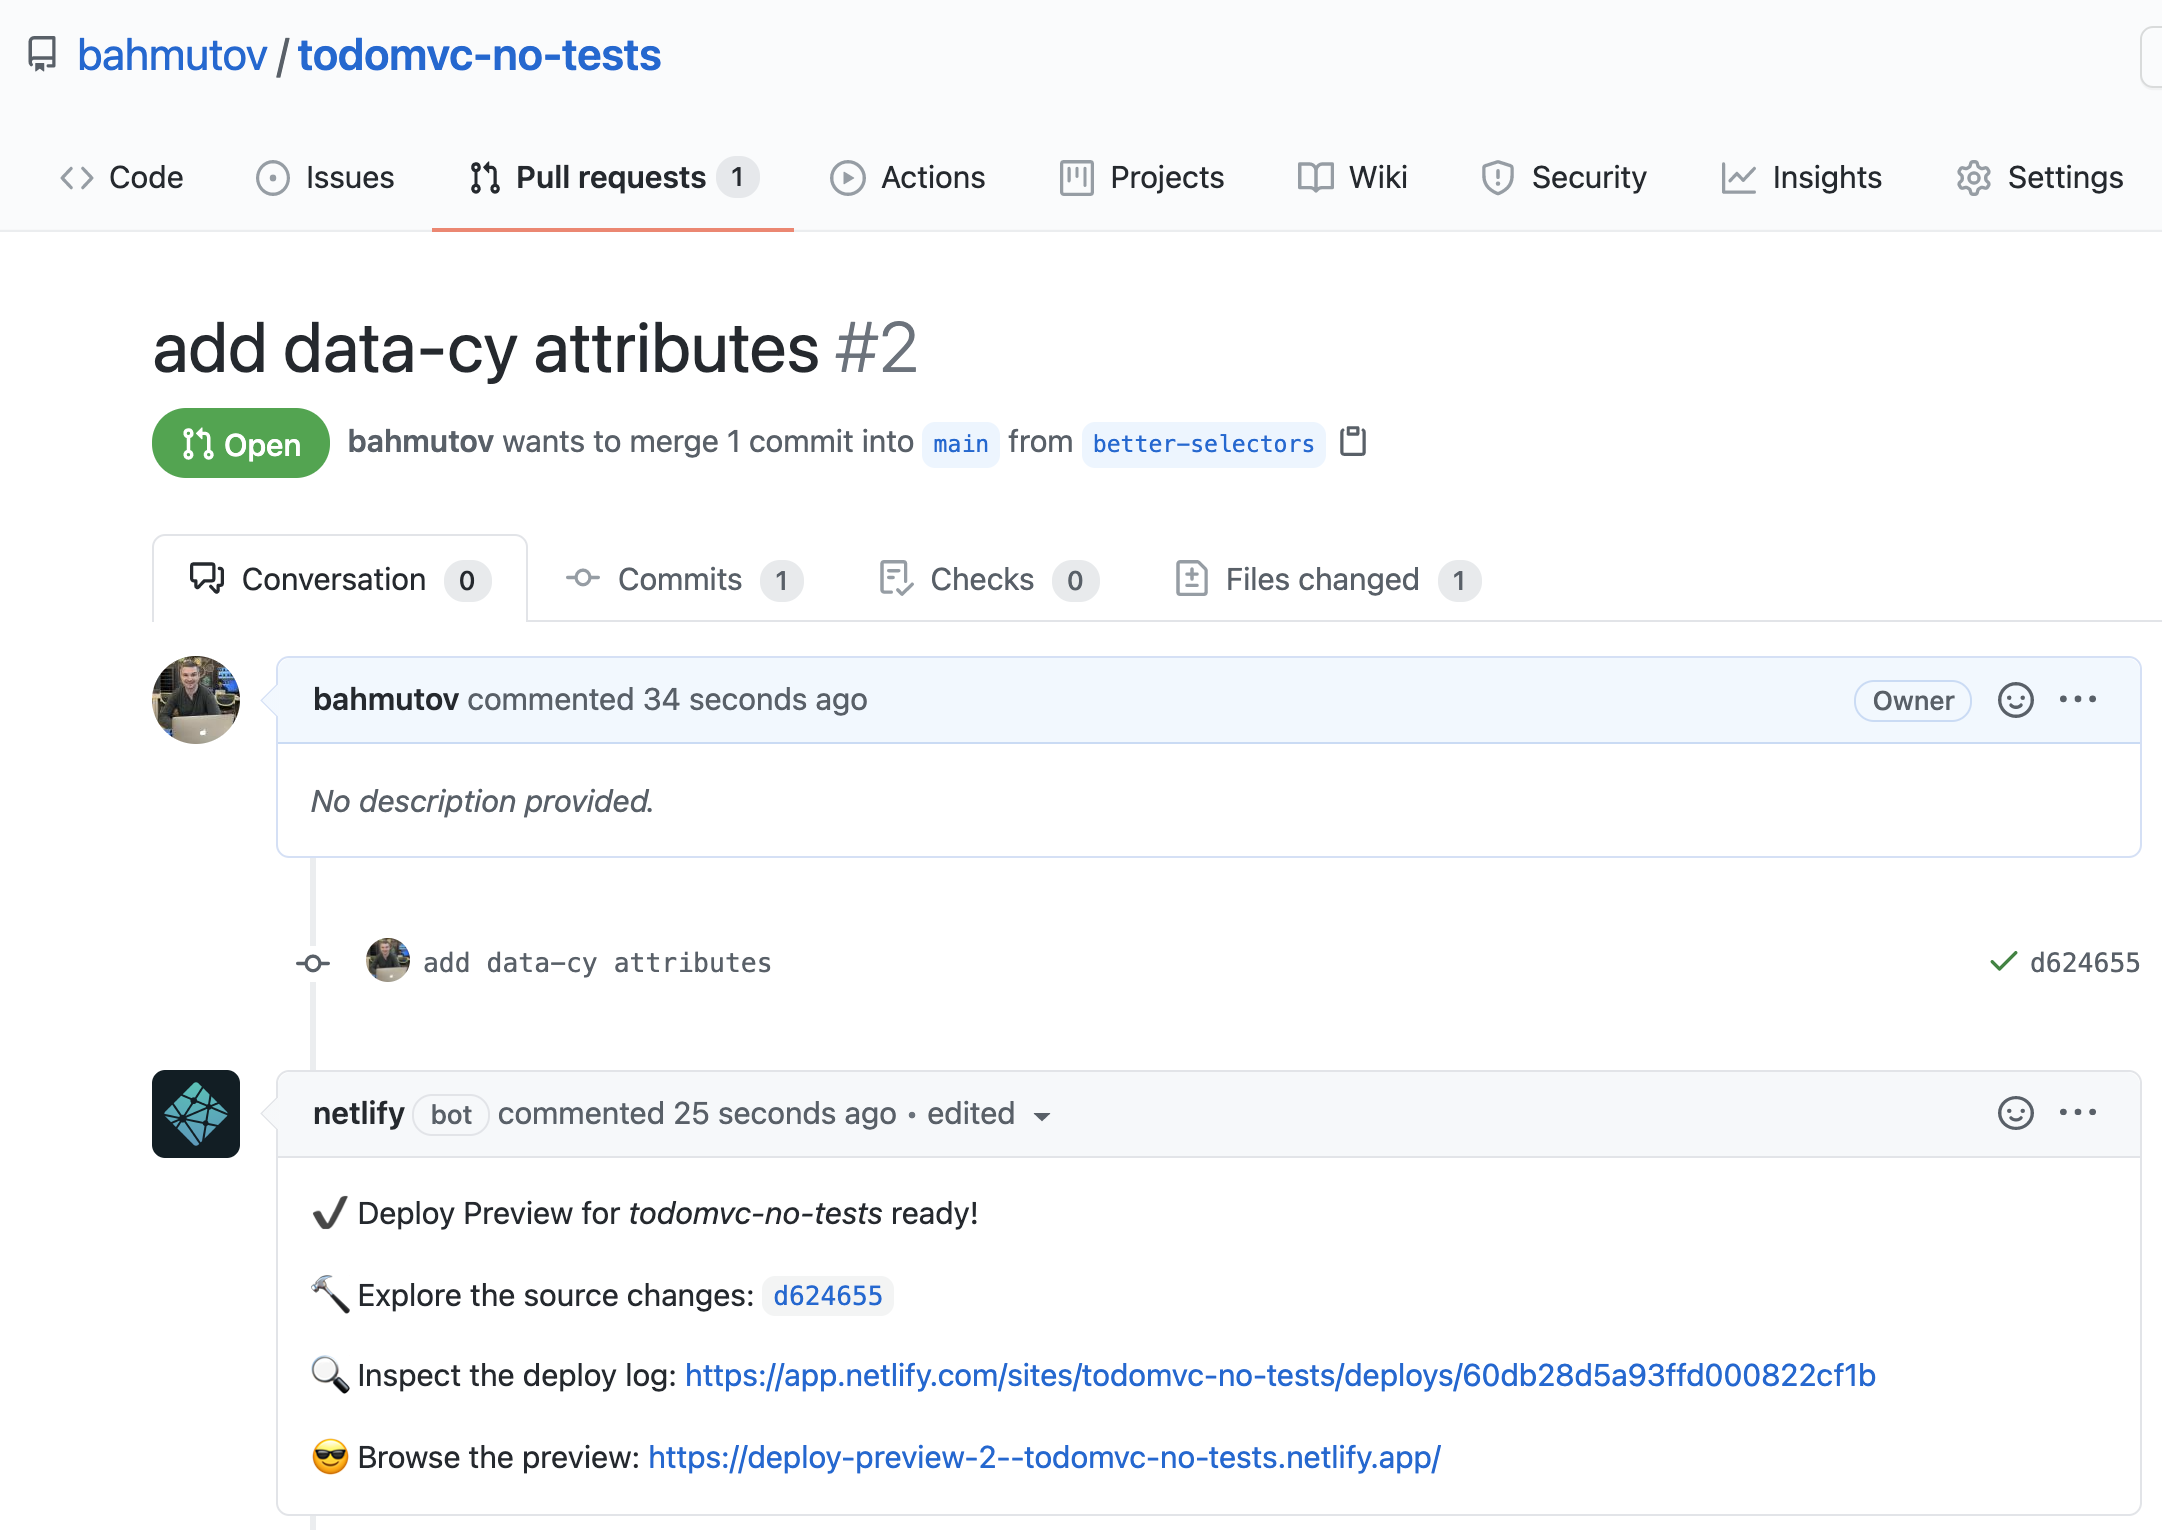 Netlify deploys the preview site for the pull request from the "better-selectors" branch